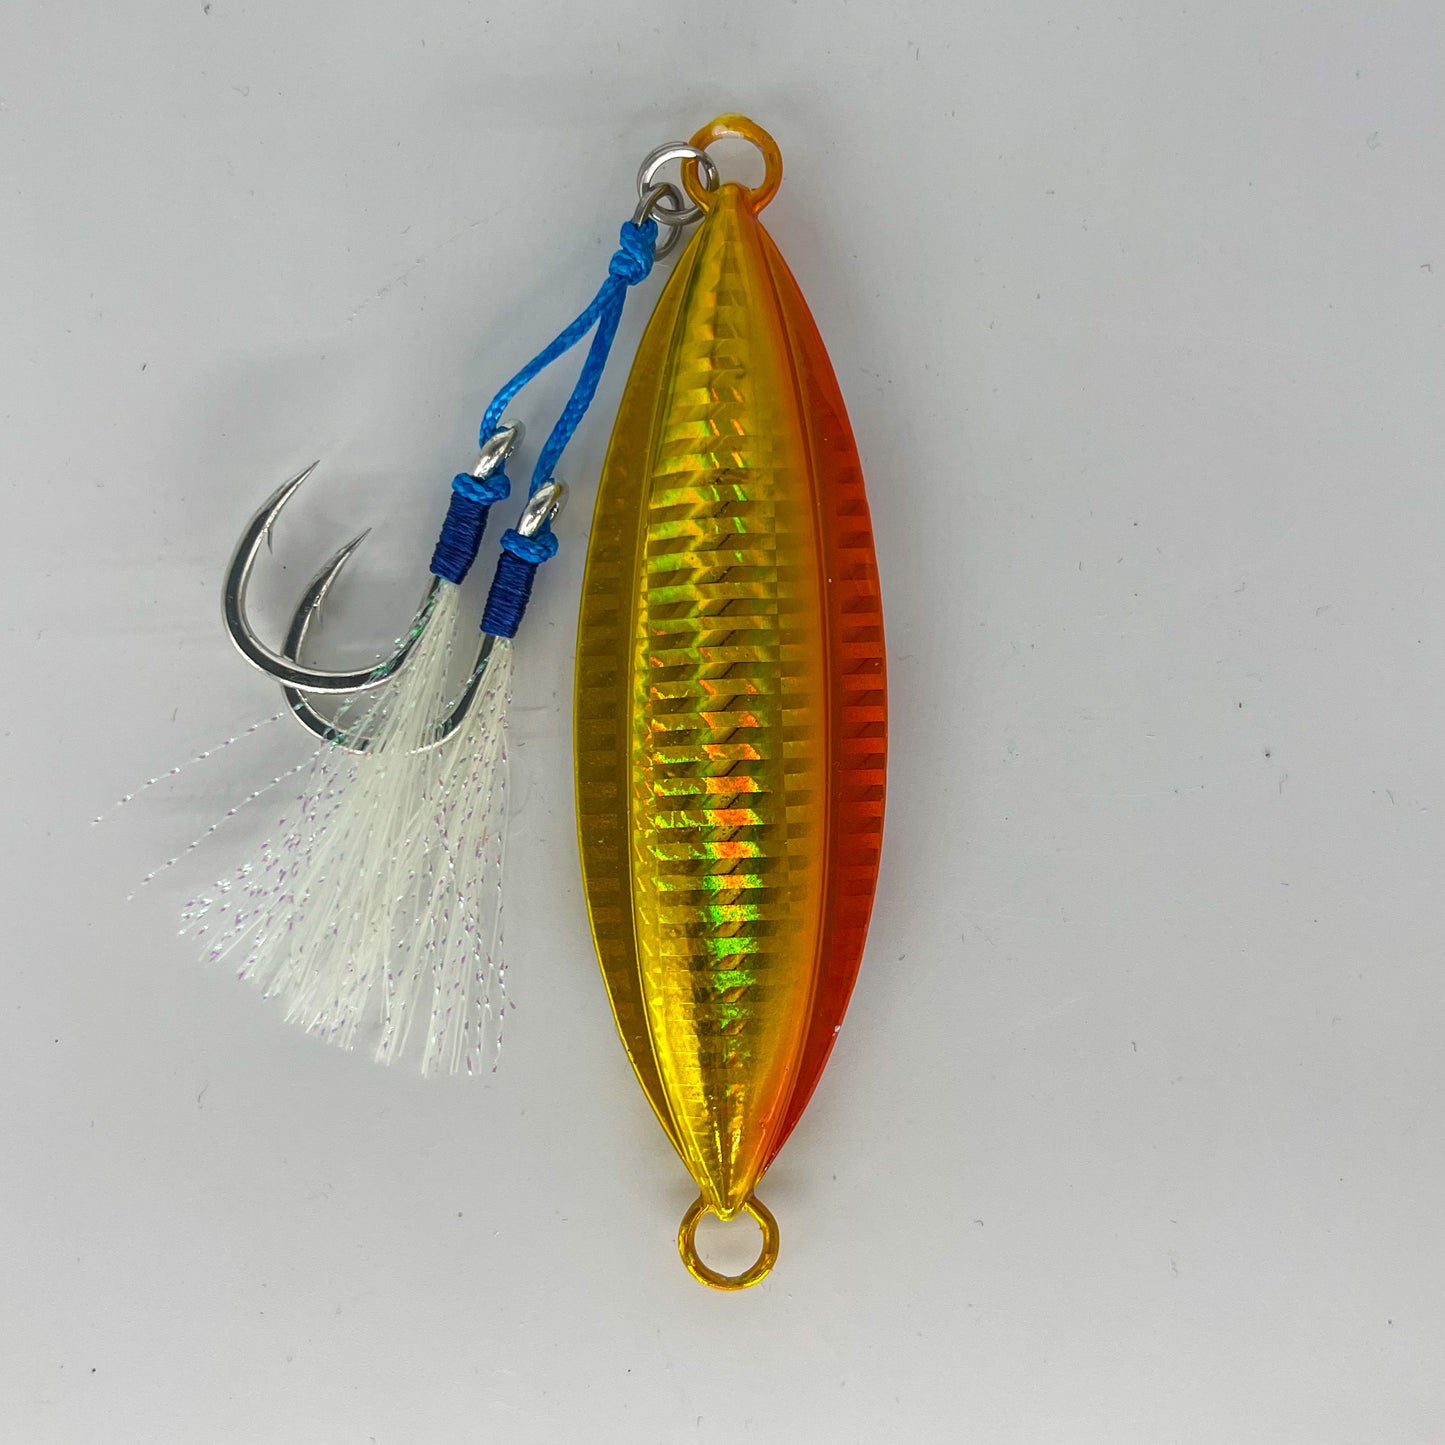 Slow Pitch Metal 'Nugget' Fishing Jig Pre Rigged